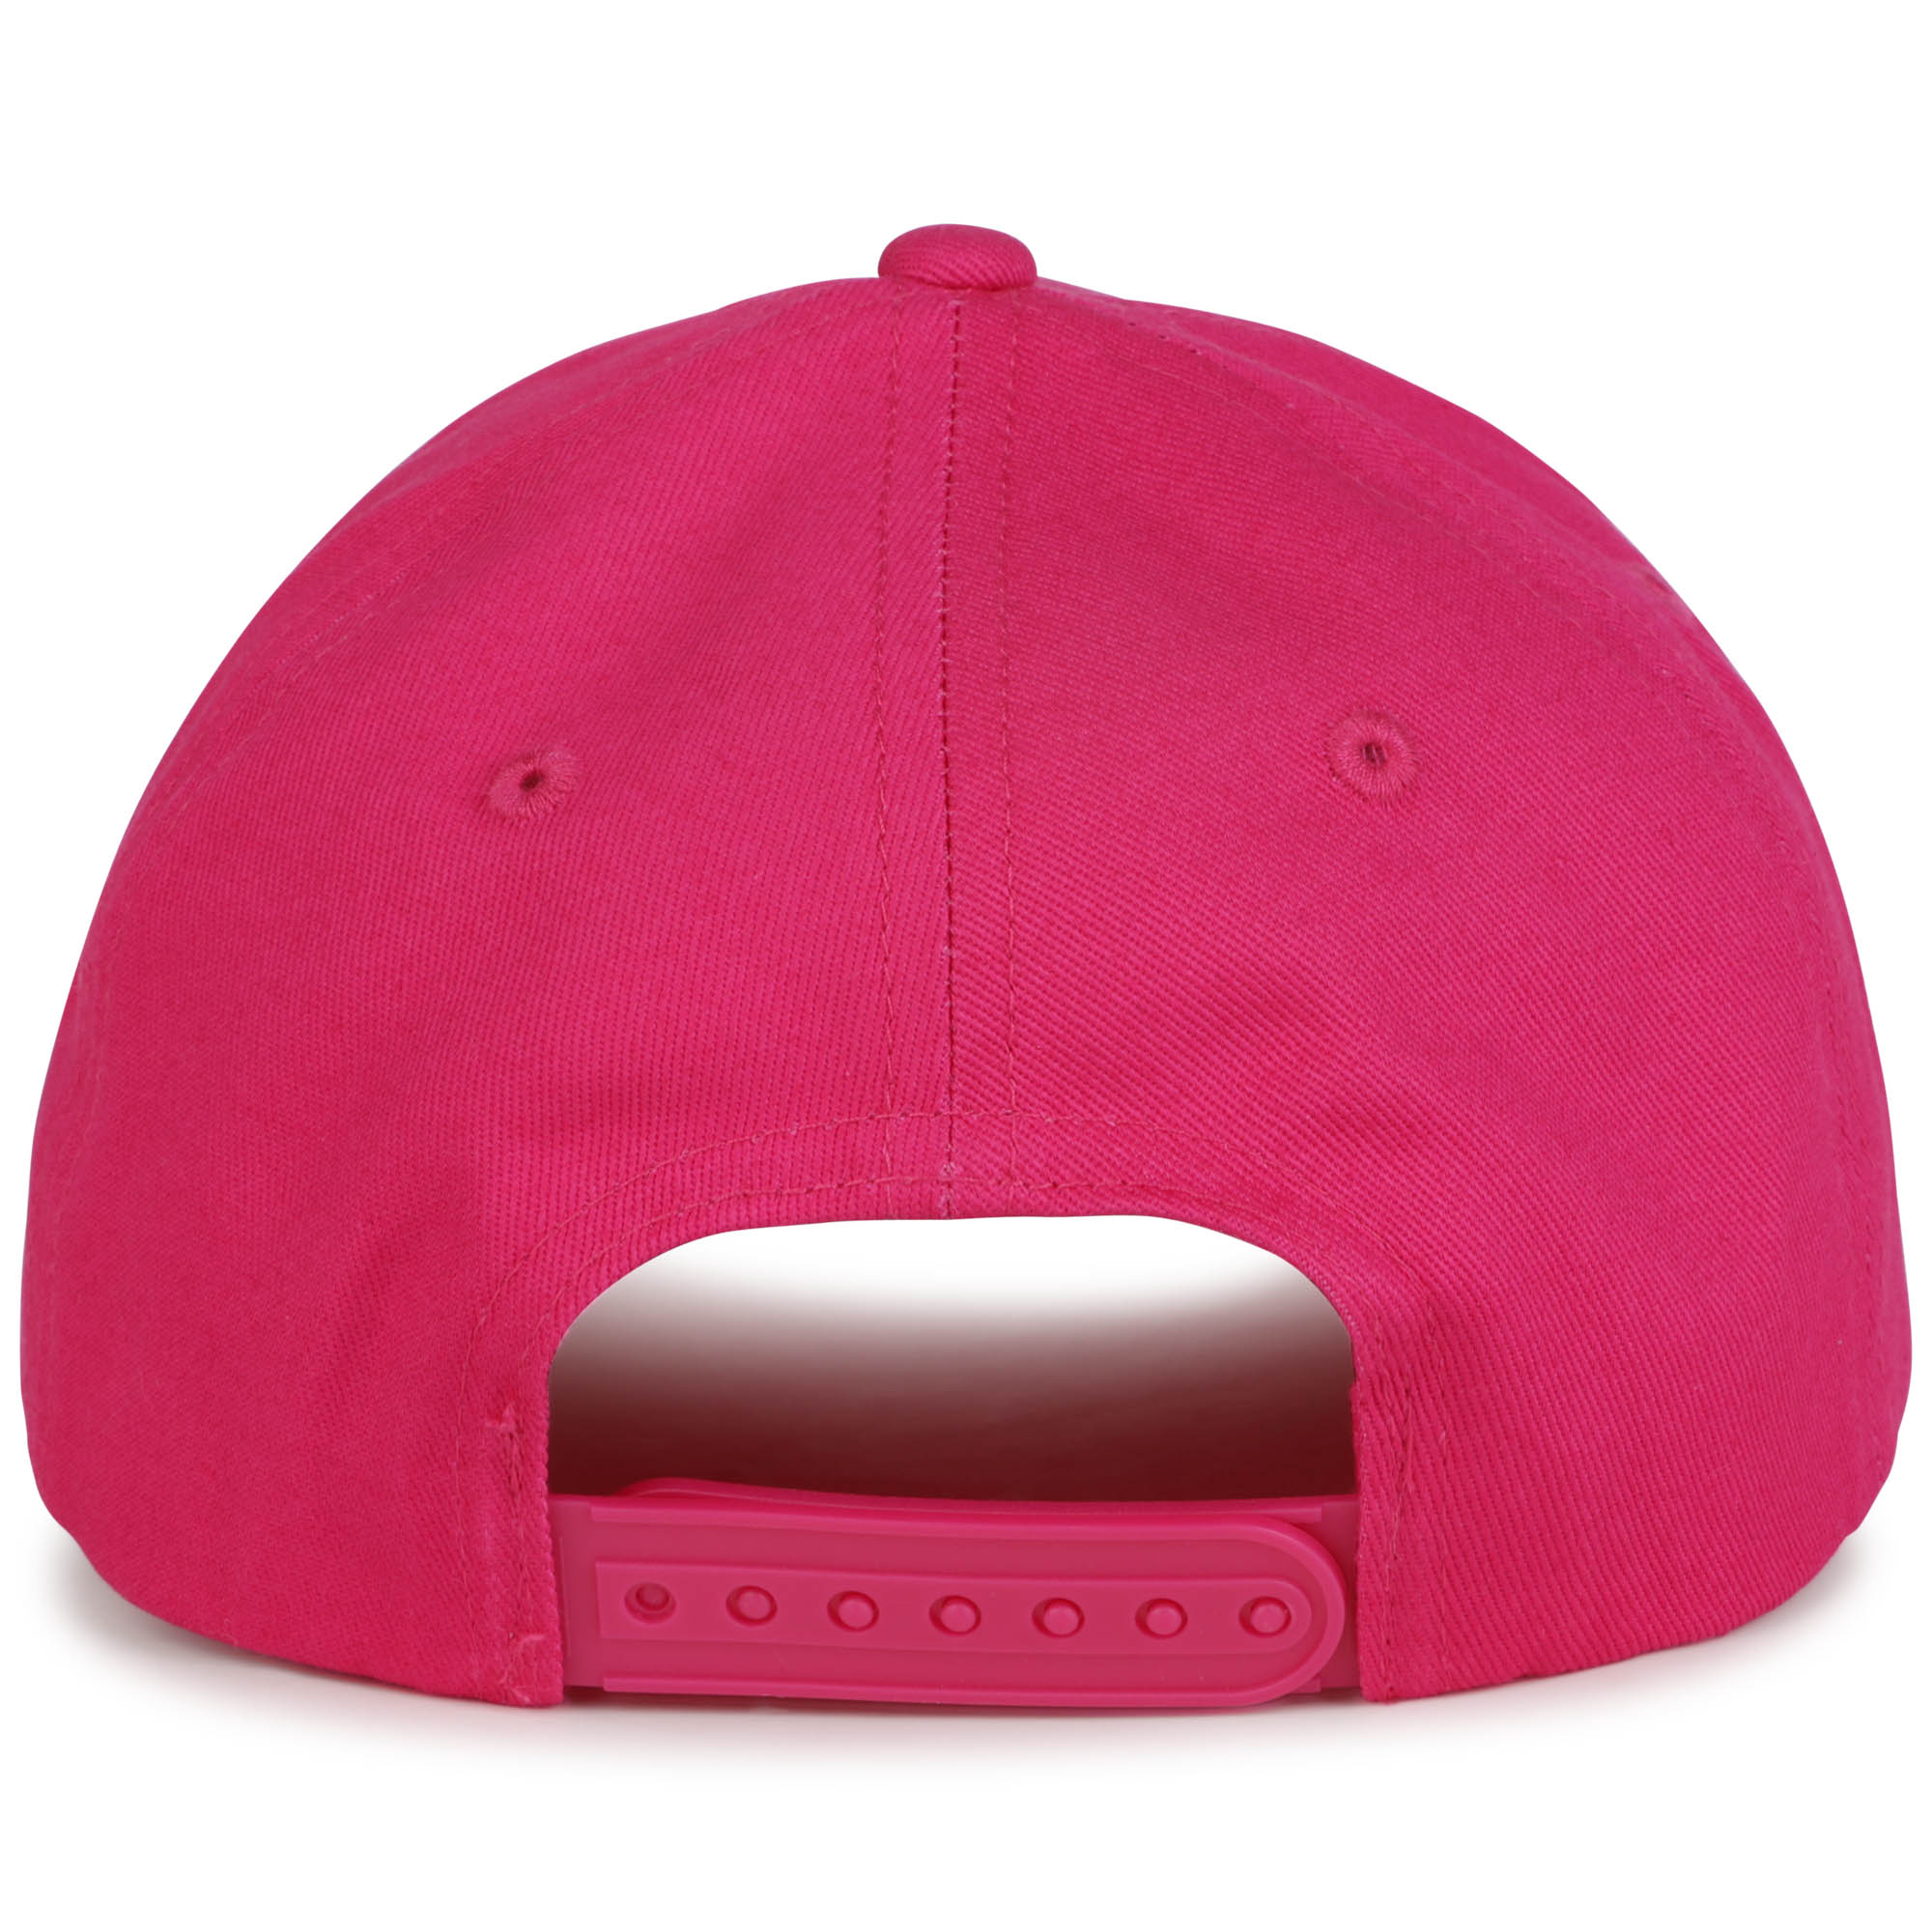 Adjustable cotton cap DKNY for GIRL